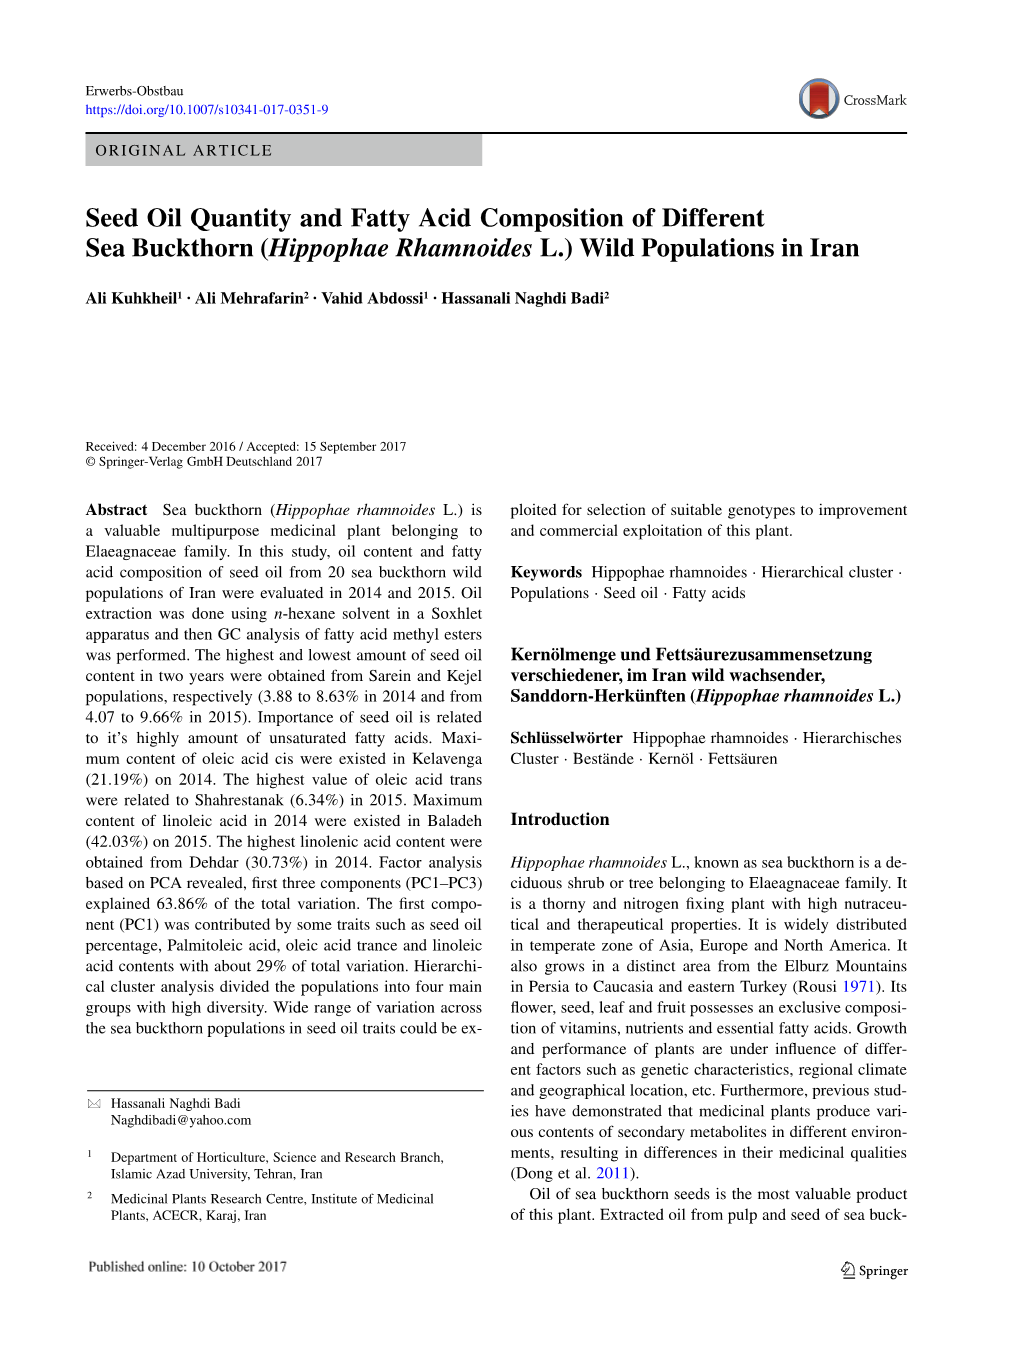 Seed Oil Quantity and Fatty Acid Composition of Different Sea Buckthorn (Hippophae Rhamnoides L.) Wild Populations in Iran